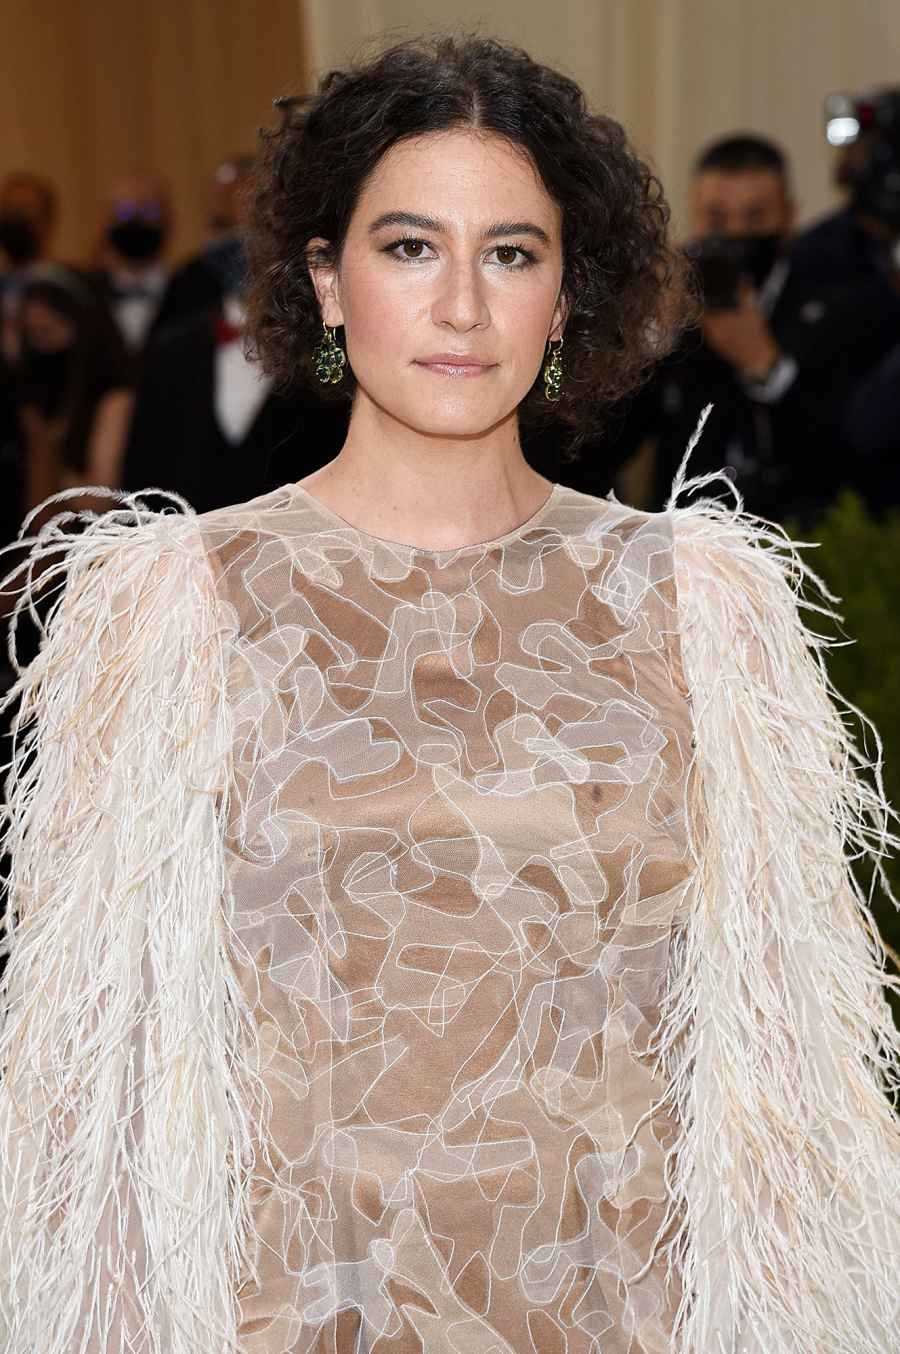 Met Gala 2021: See the Wildest Hair and Makeup on the Red Carpet